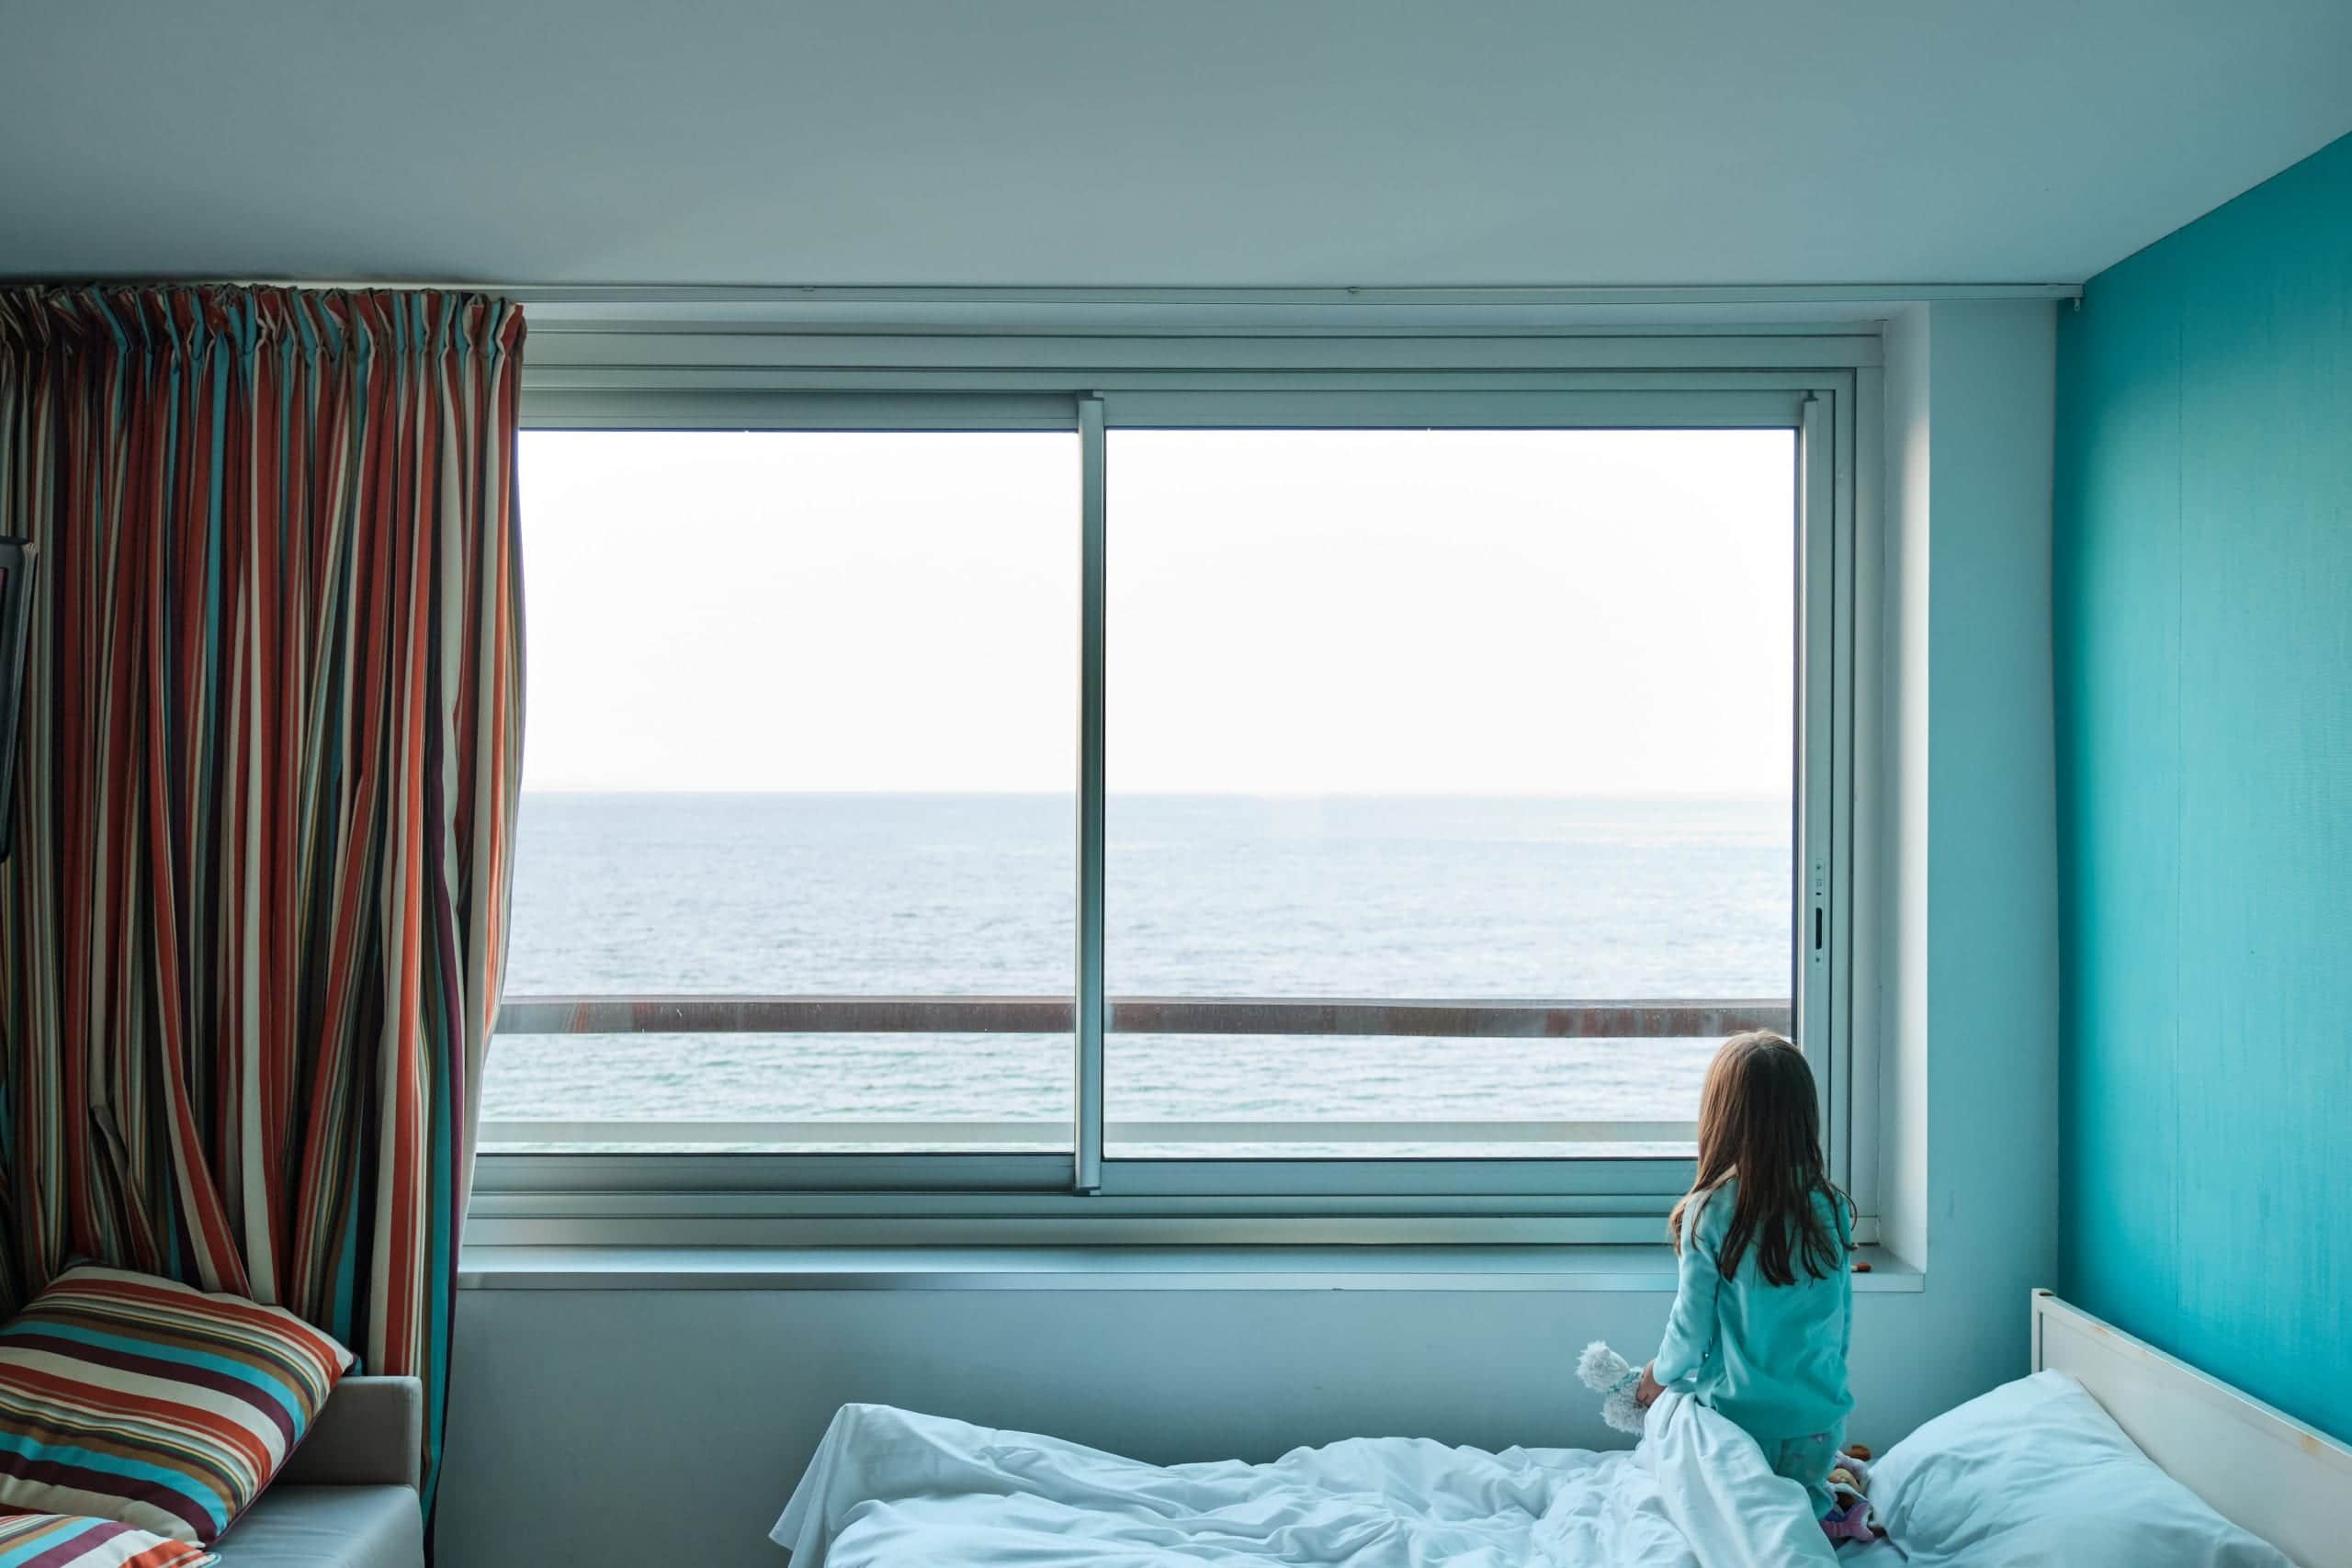 A little girl looks at the sea through the window of a hotel room